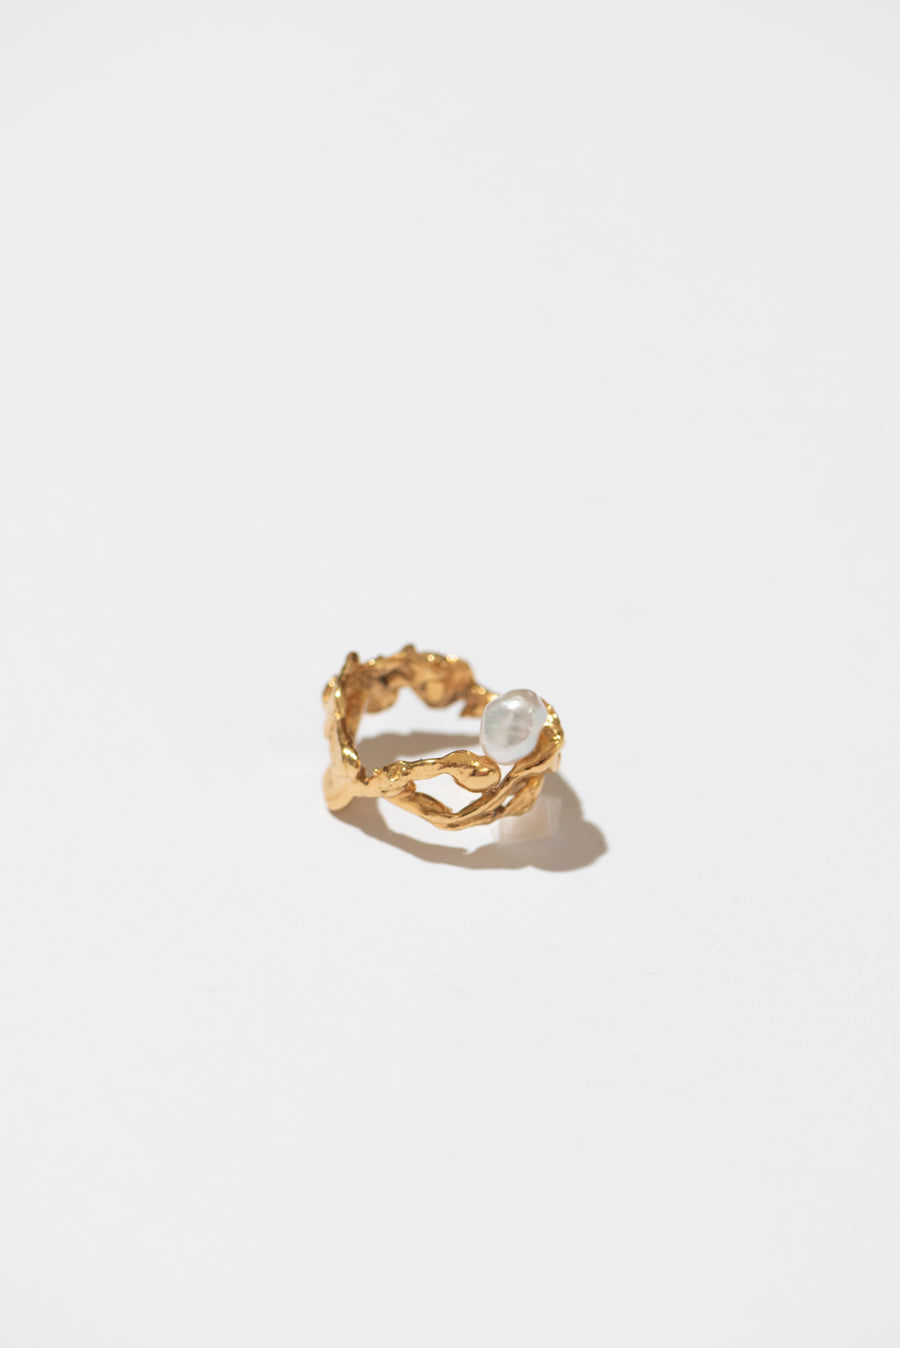 The Statement Pearl Ring - Small